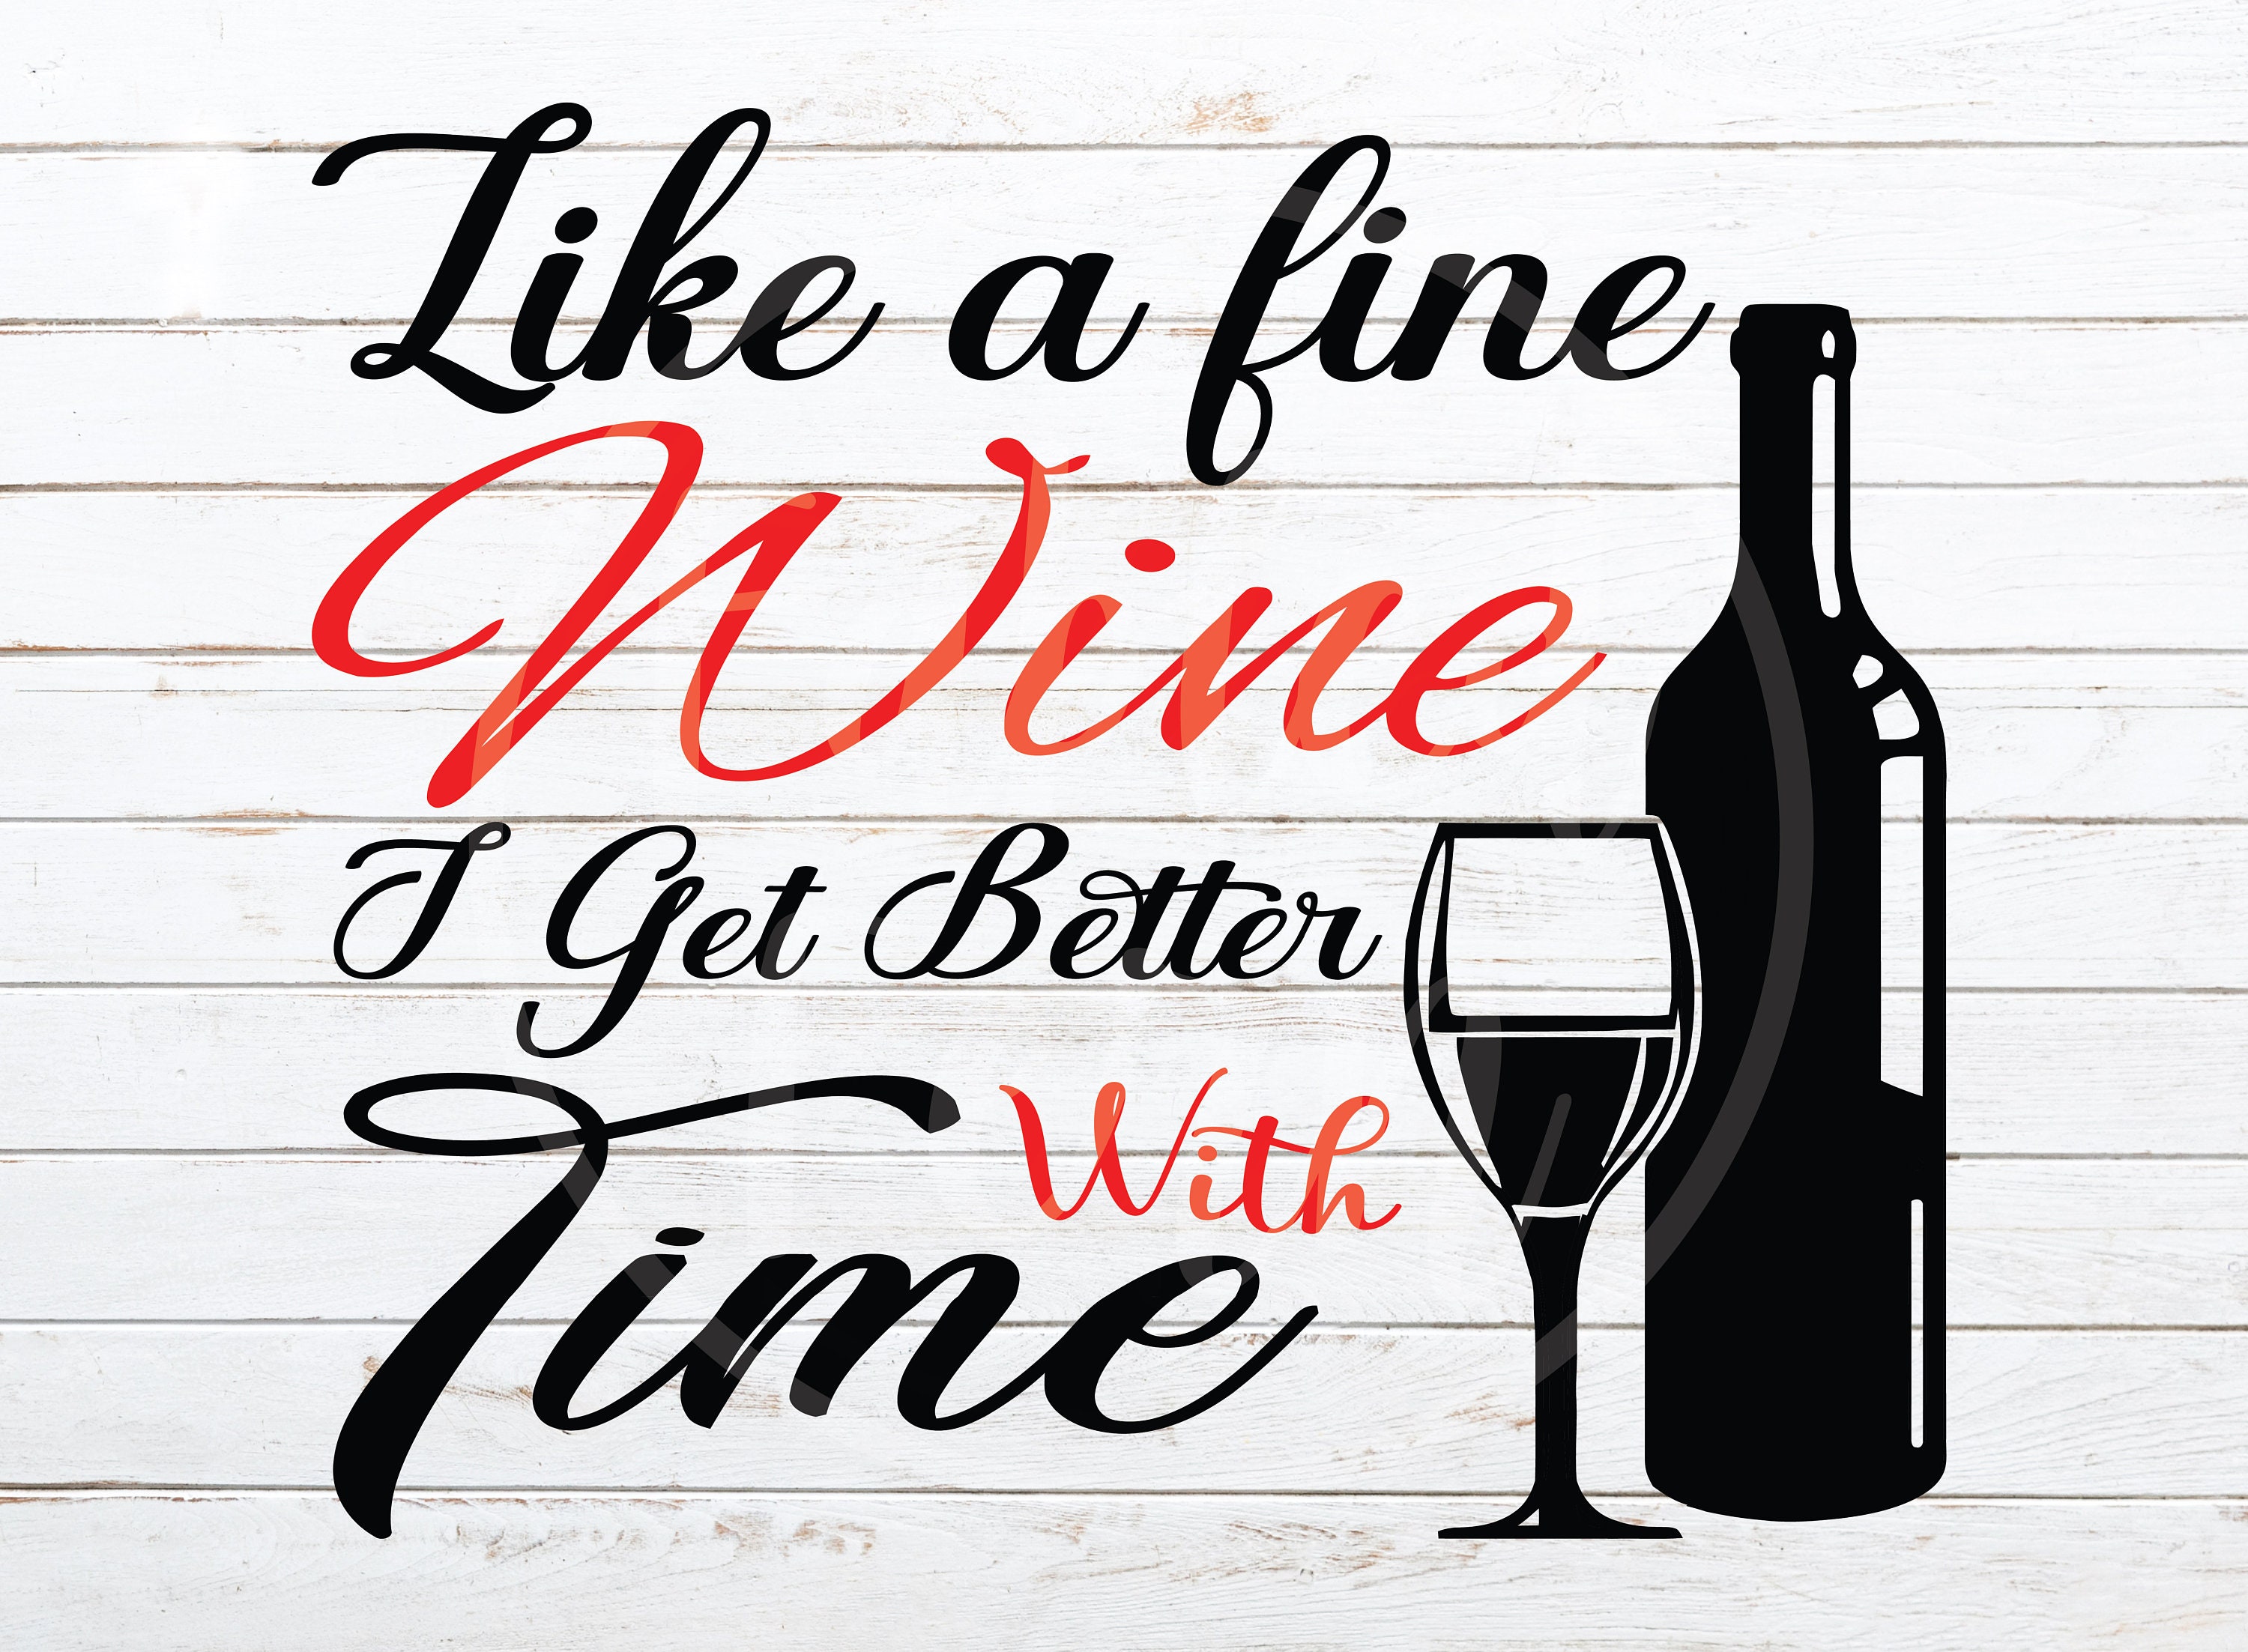 Like A Fine Wine I Get Better With Time Png Instant Download Etsy